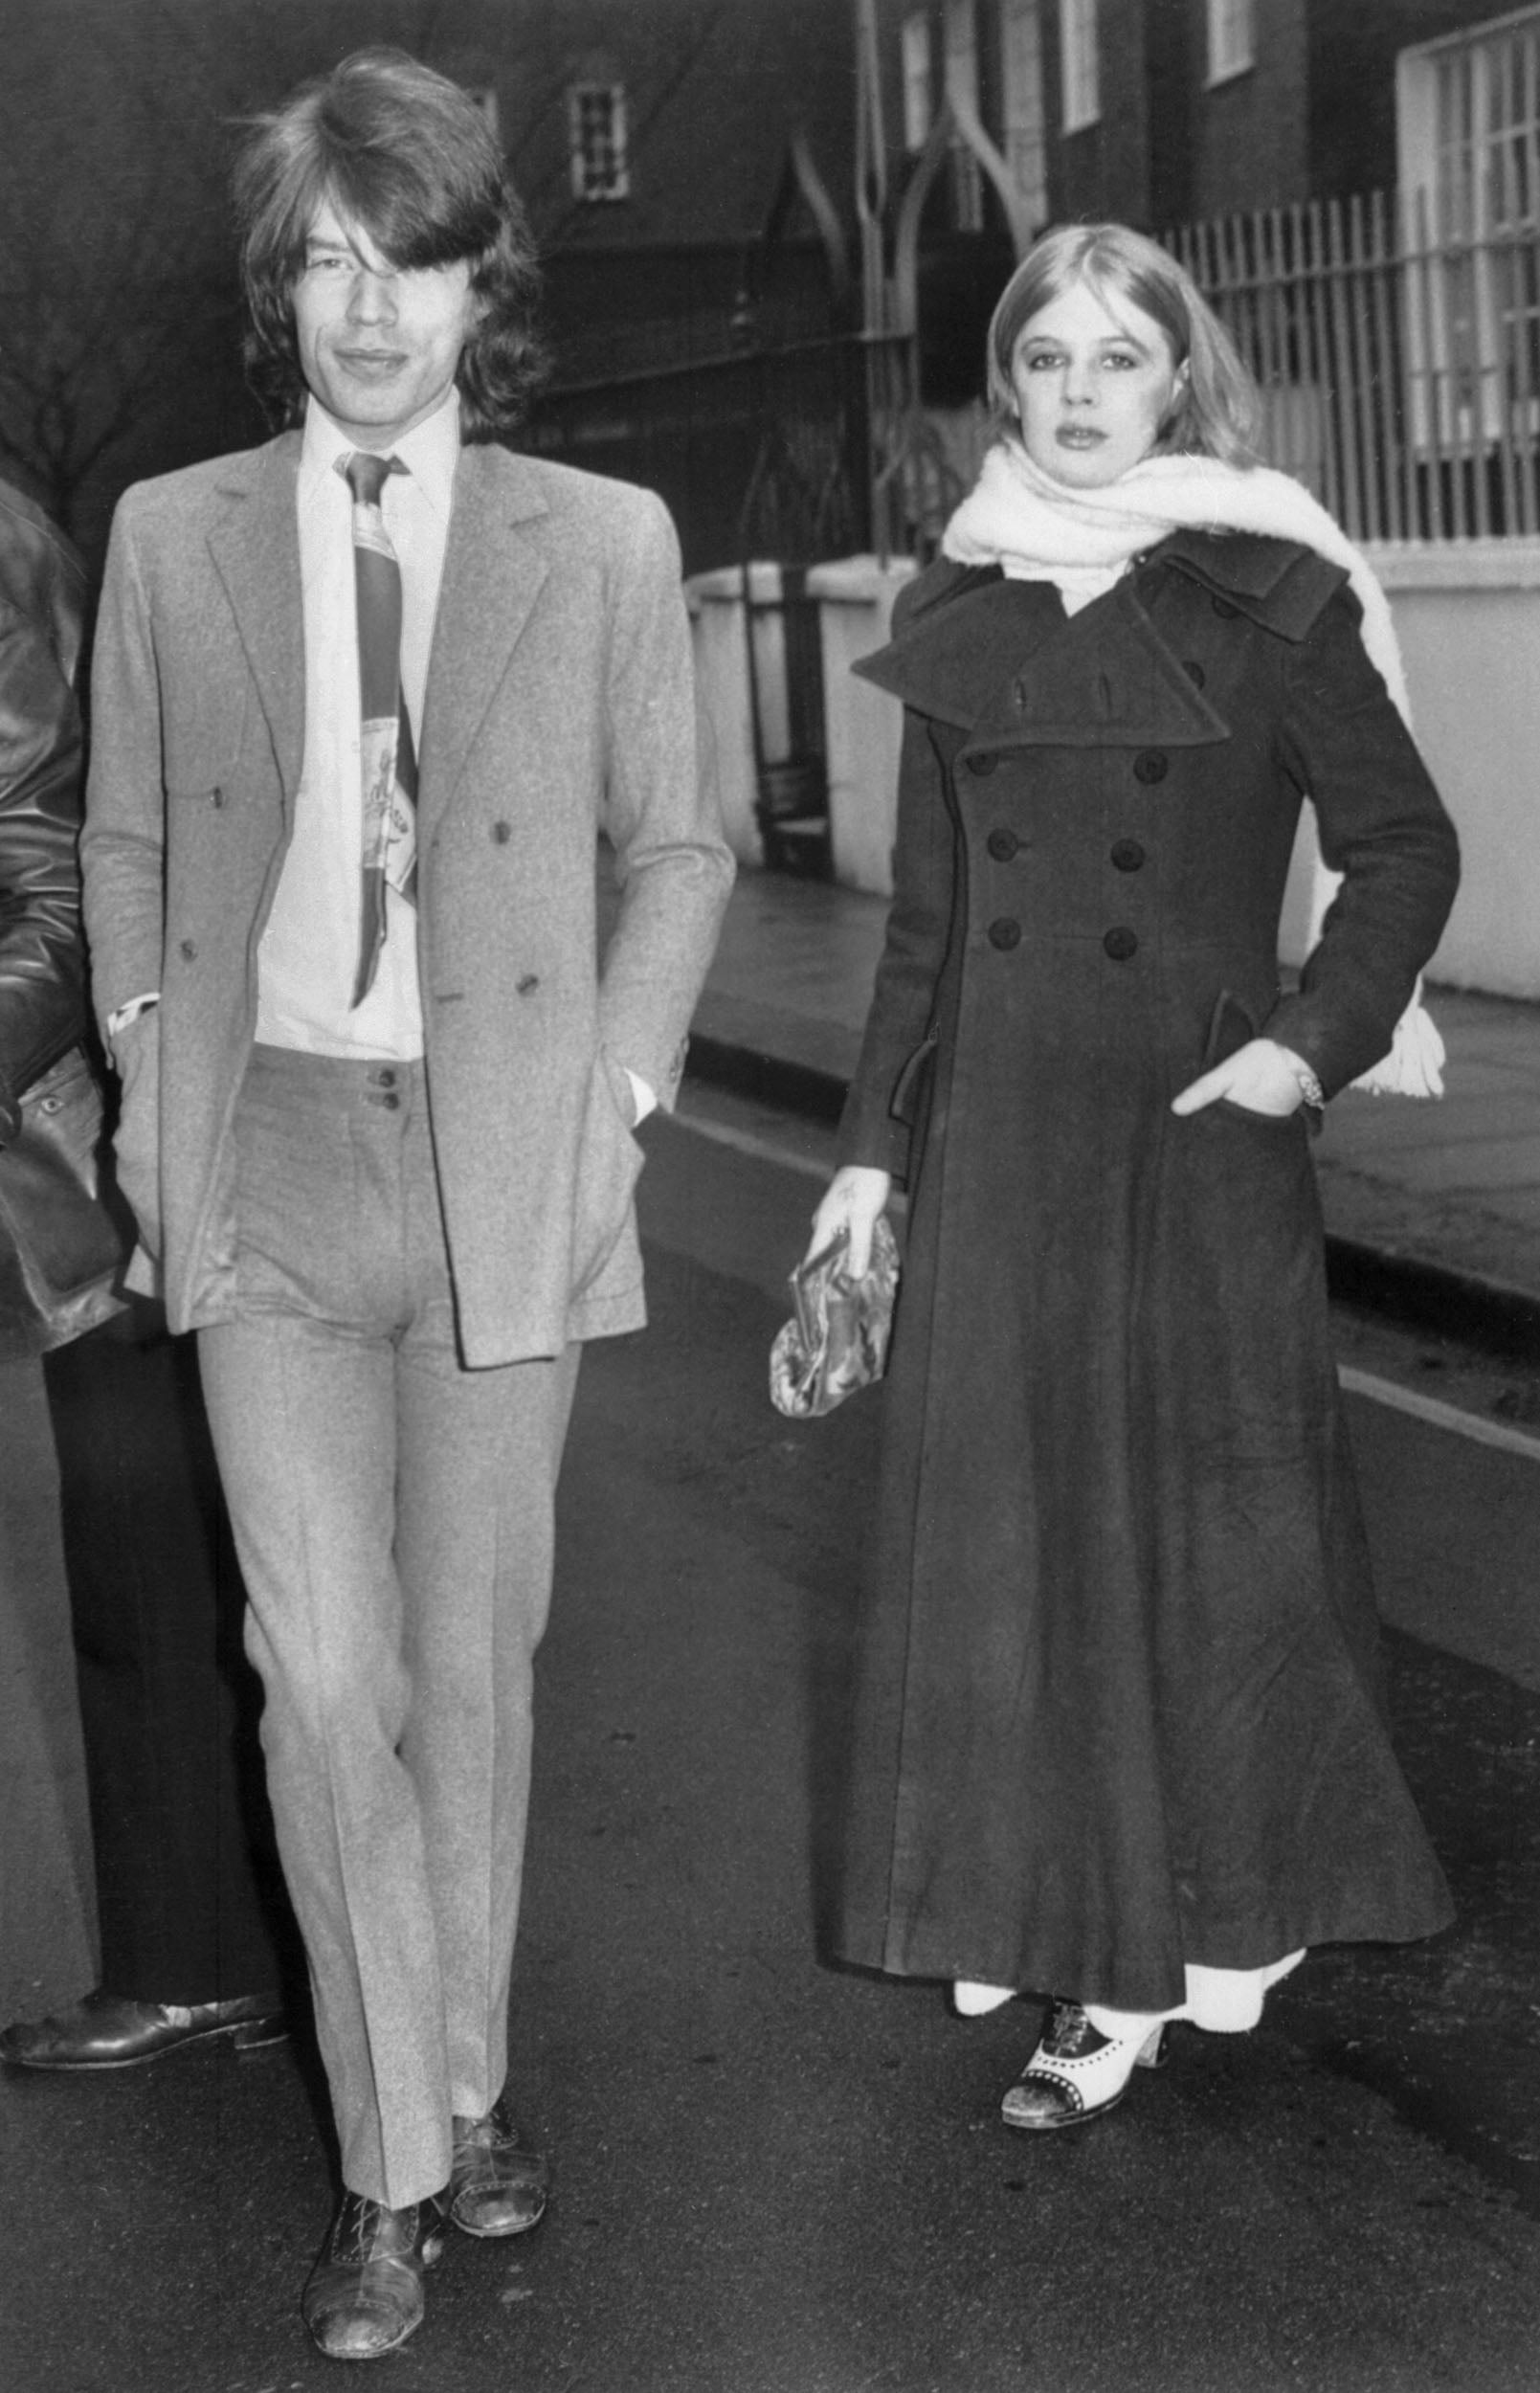 Mick Jagger And Marianne Faithfull The Most Stylish Music Couples Of All Time Popsugar Fashion Photo 15